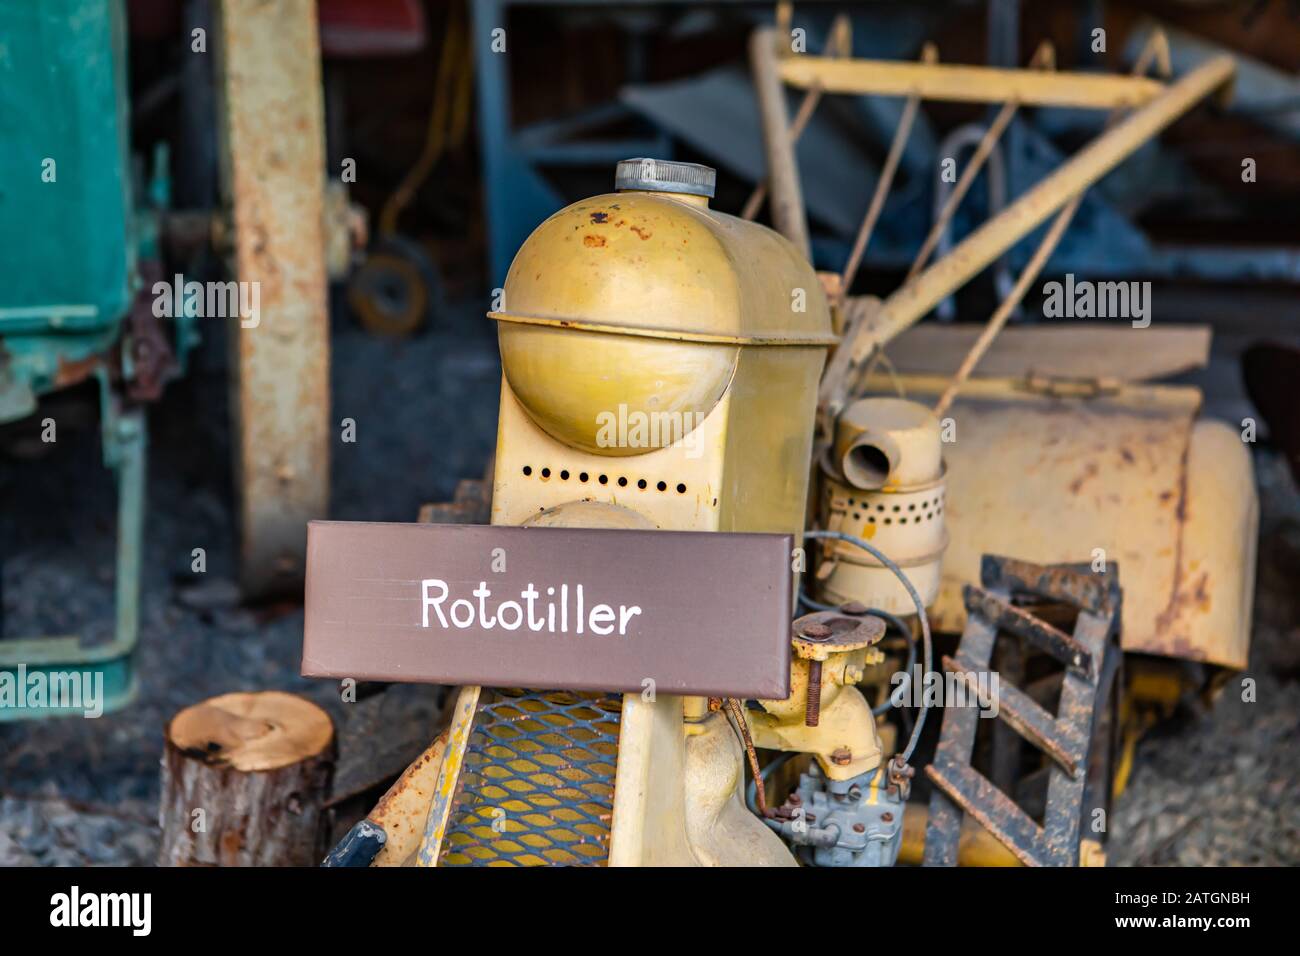 Antique farming technology. An old rustic rototiller machine used for cultivating fields. Agricultural museum in Kootenays, British Columbia, Canada Stock Photo